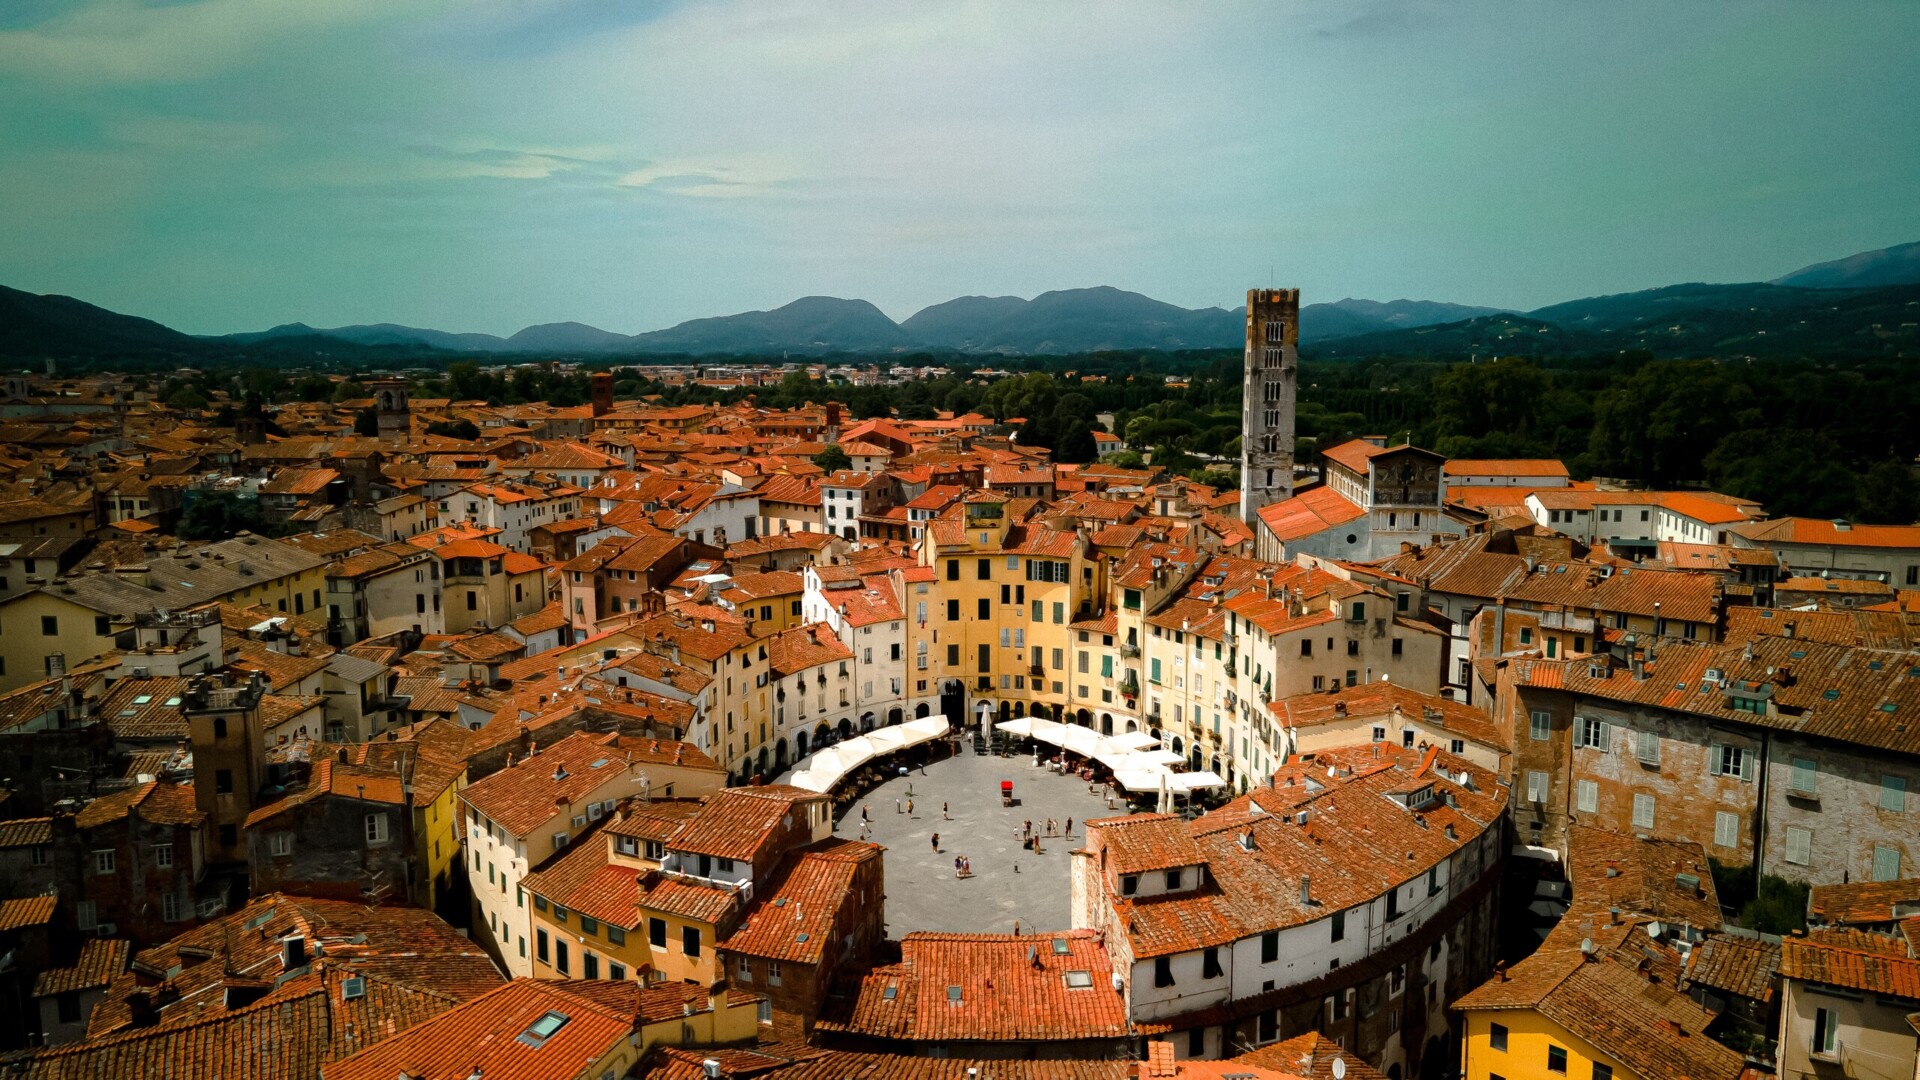 Aerial view of the main square Piazza Dell Anfiteatro in Lucca, Tuscany, Italy